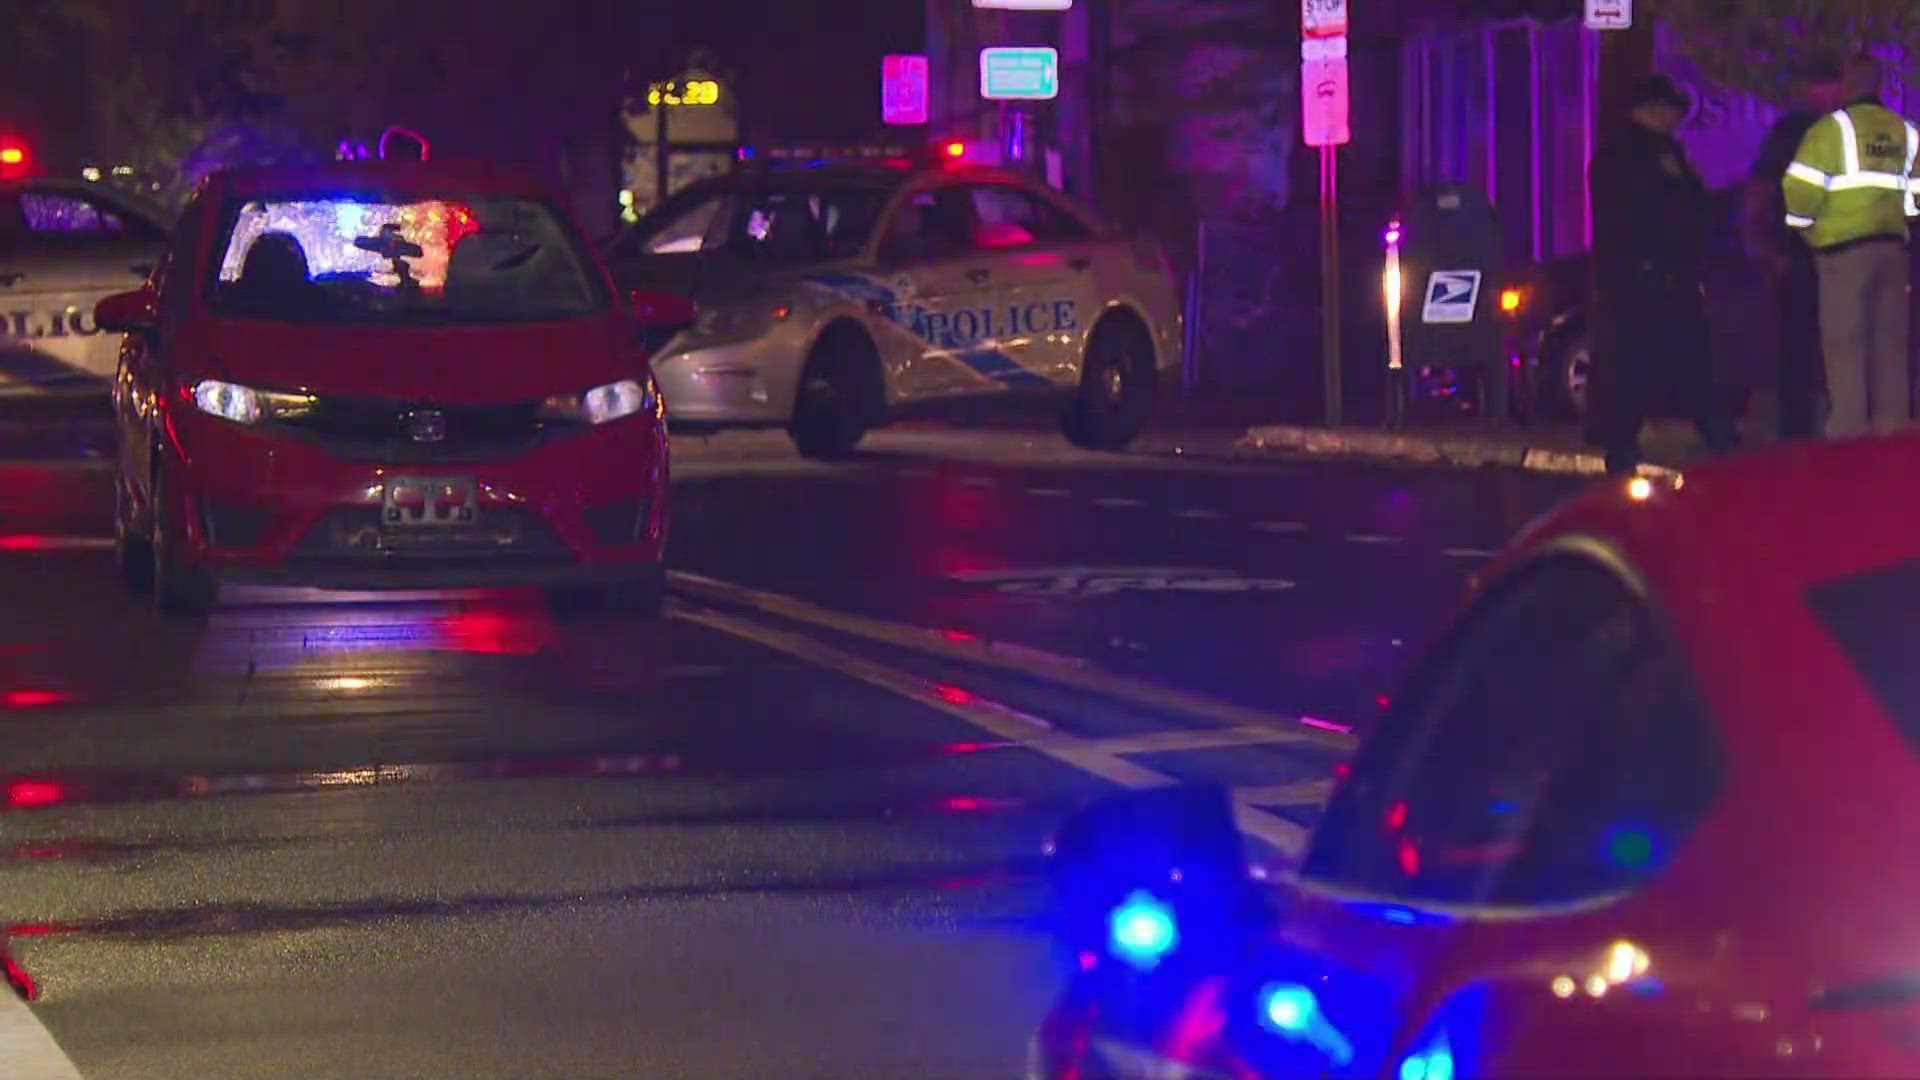 Louisville Metro Police said a car hit two people around 9:30 p.m.